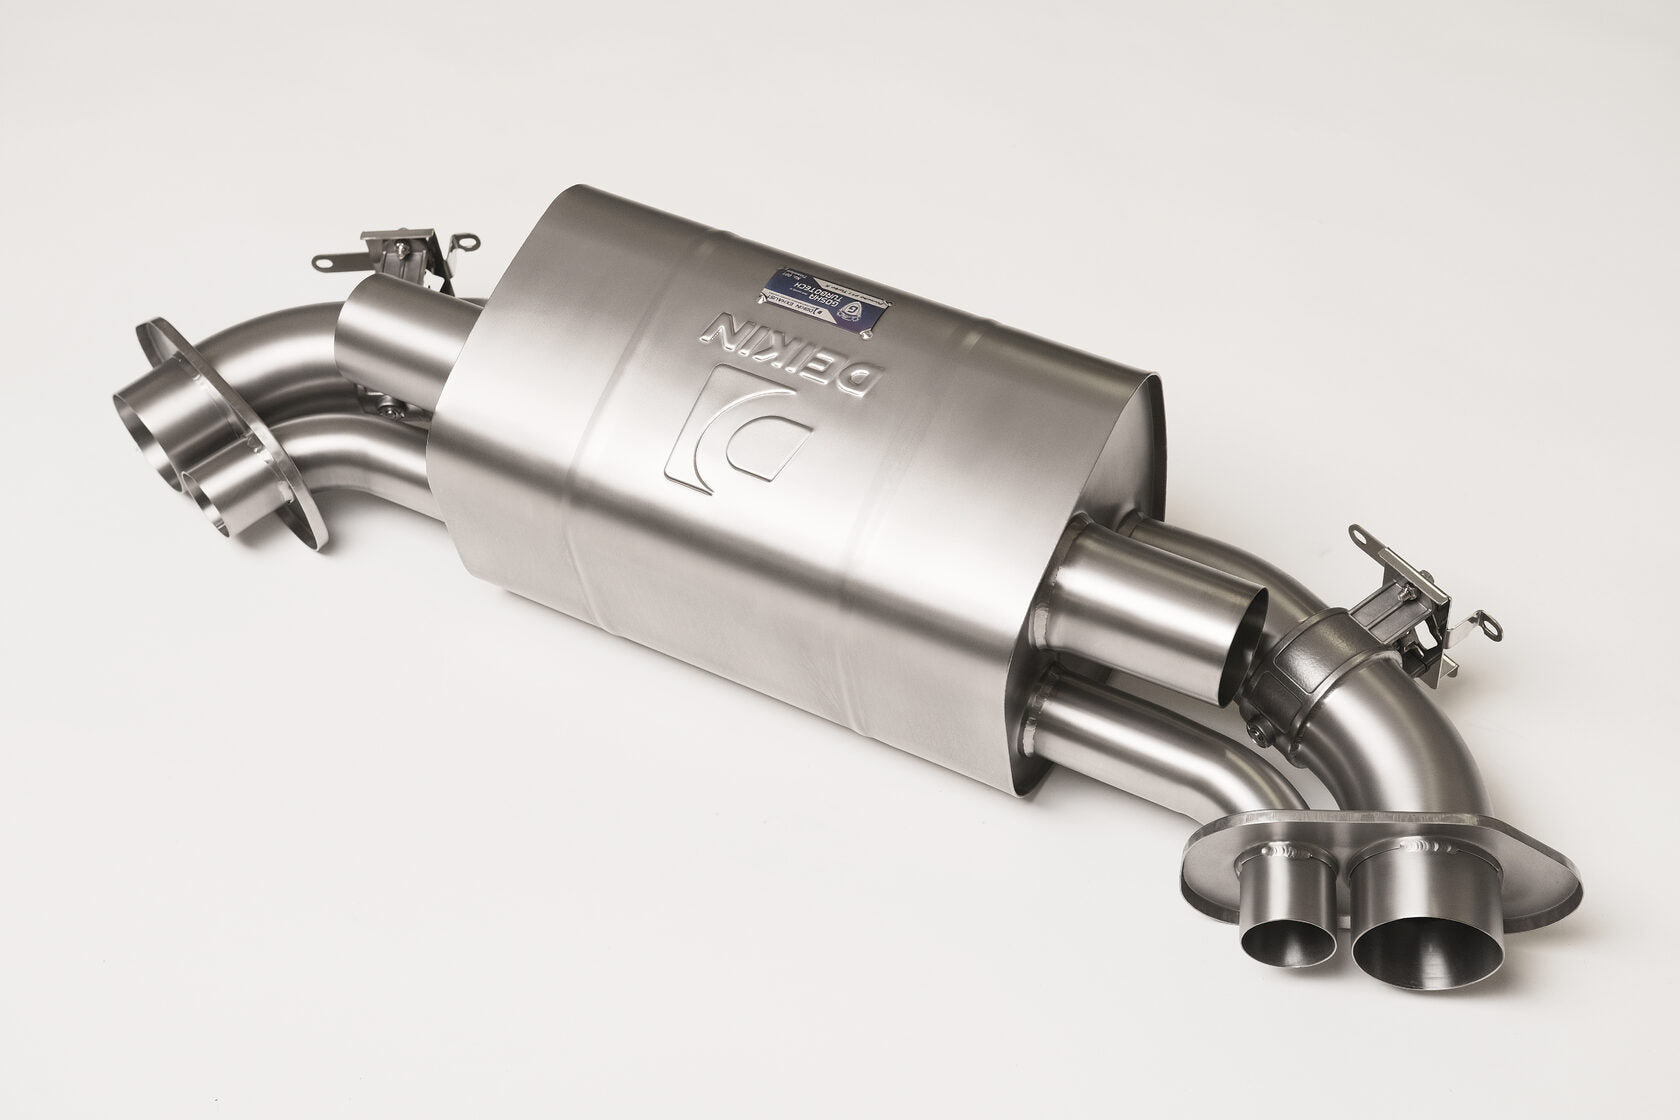 DEIKIN 10-PO.911.T/TS.992.S-ES-DP-Ti-00 Exhaust system "Street" Titan for 911 Turbo/Turbo S (992) complete with downpipes without HeatShield Photo-1 